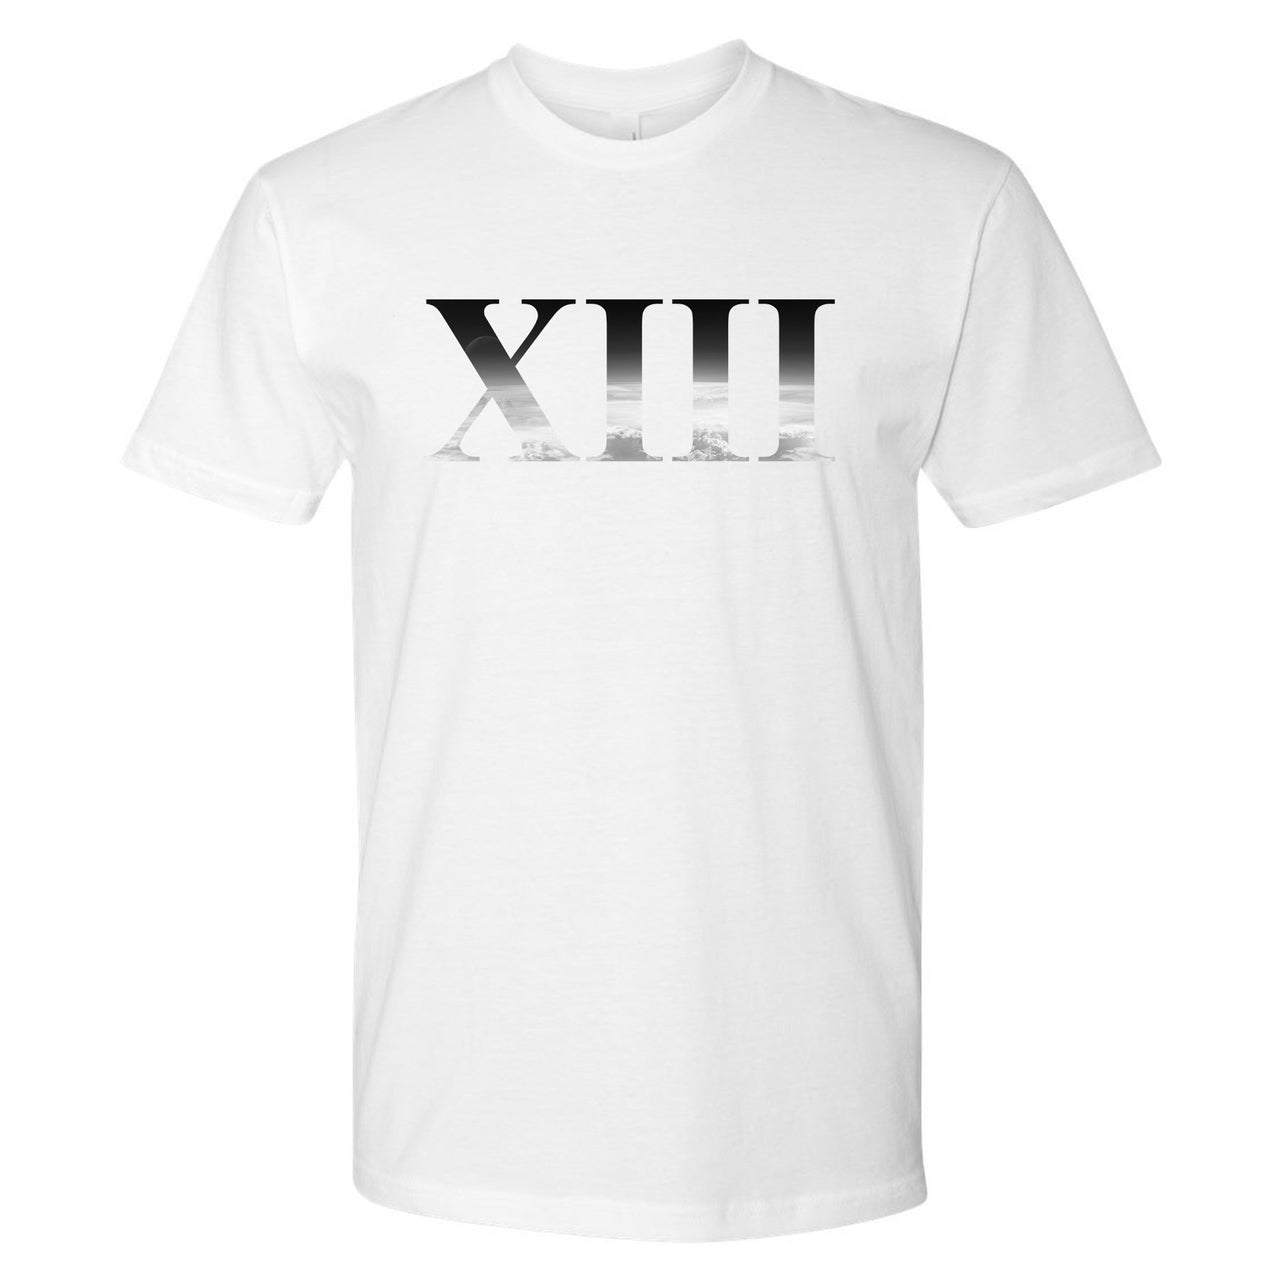 Atmosphere Grey 13s T Shirt | XIII, White